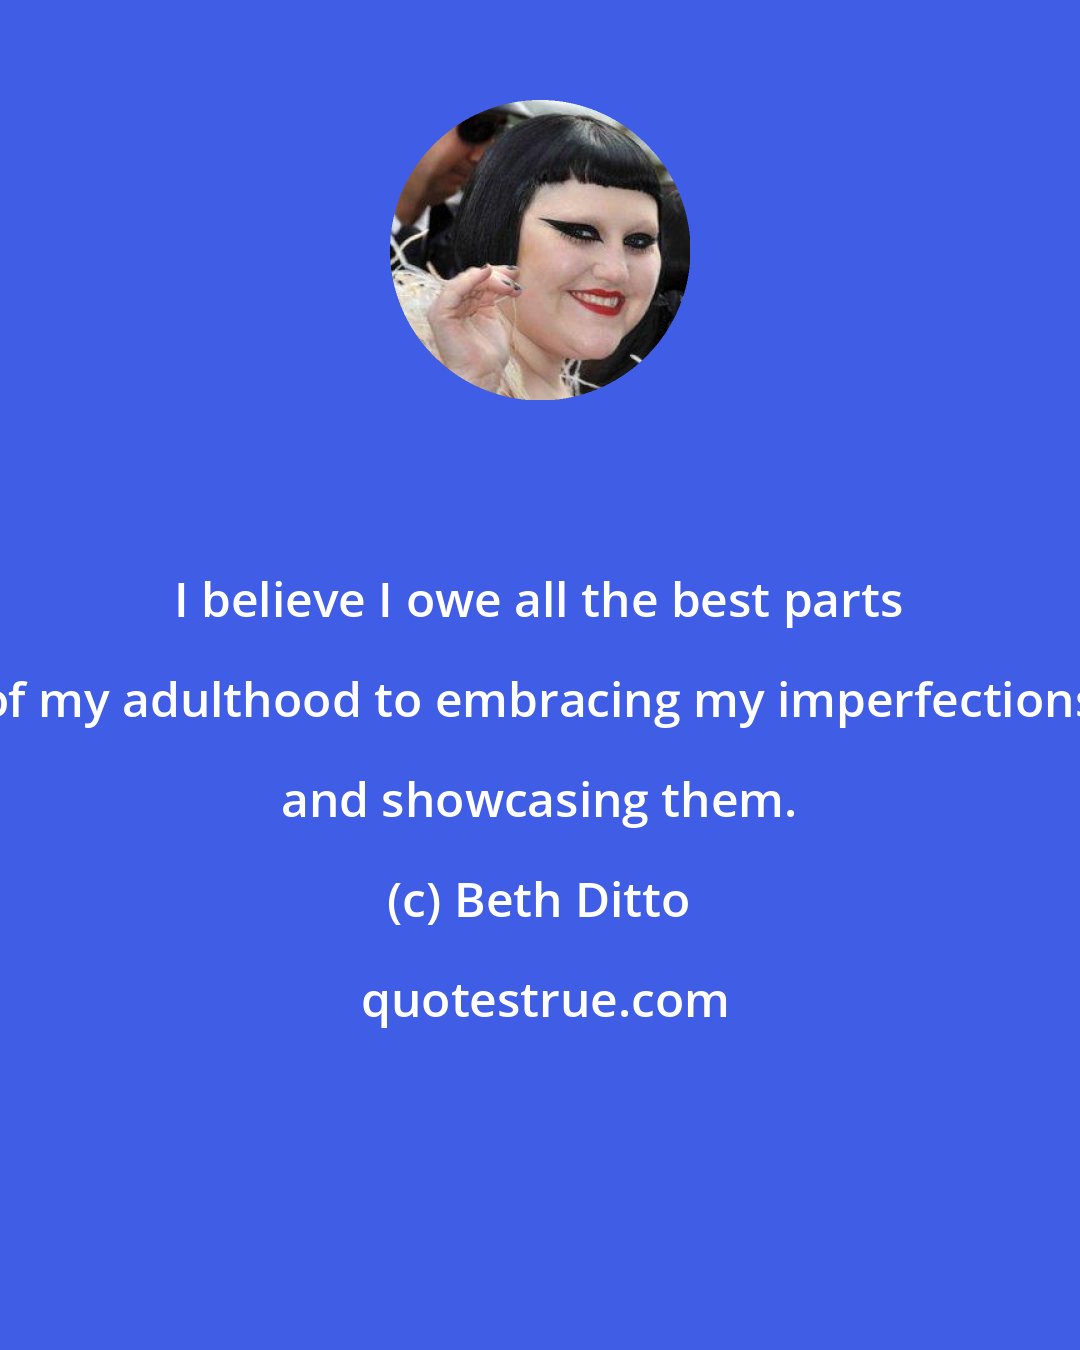 Beth Ditto: I believe I owe all the best parts of my adulthood to embracing my imperfections and showcasing them.